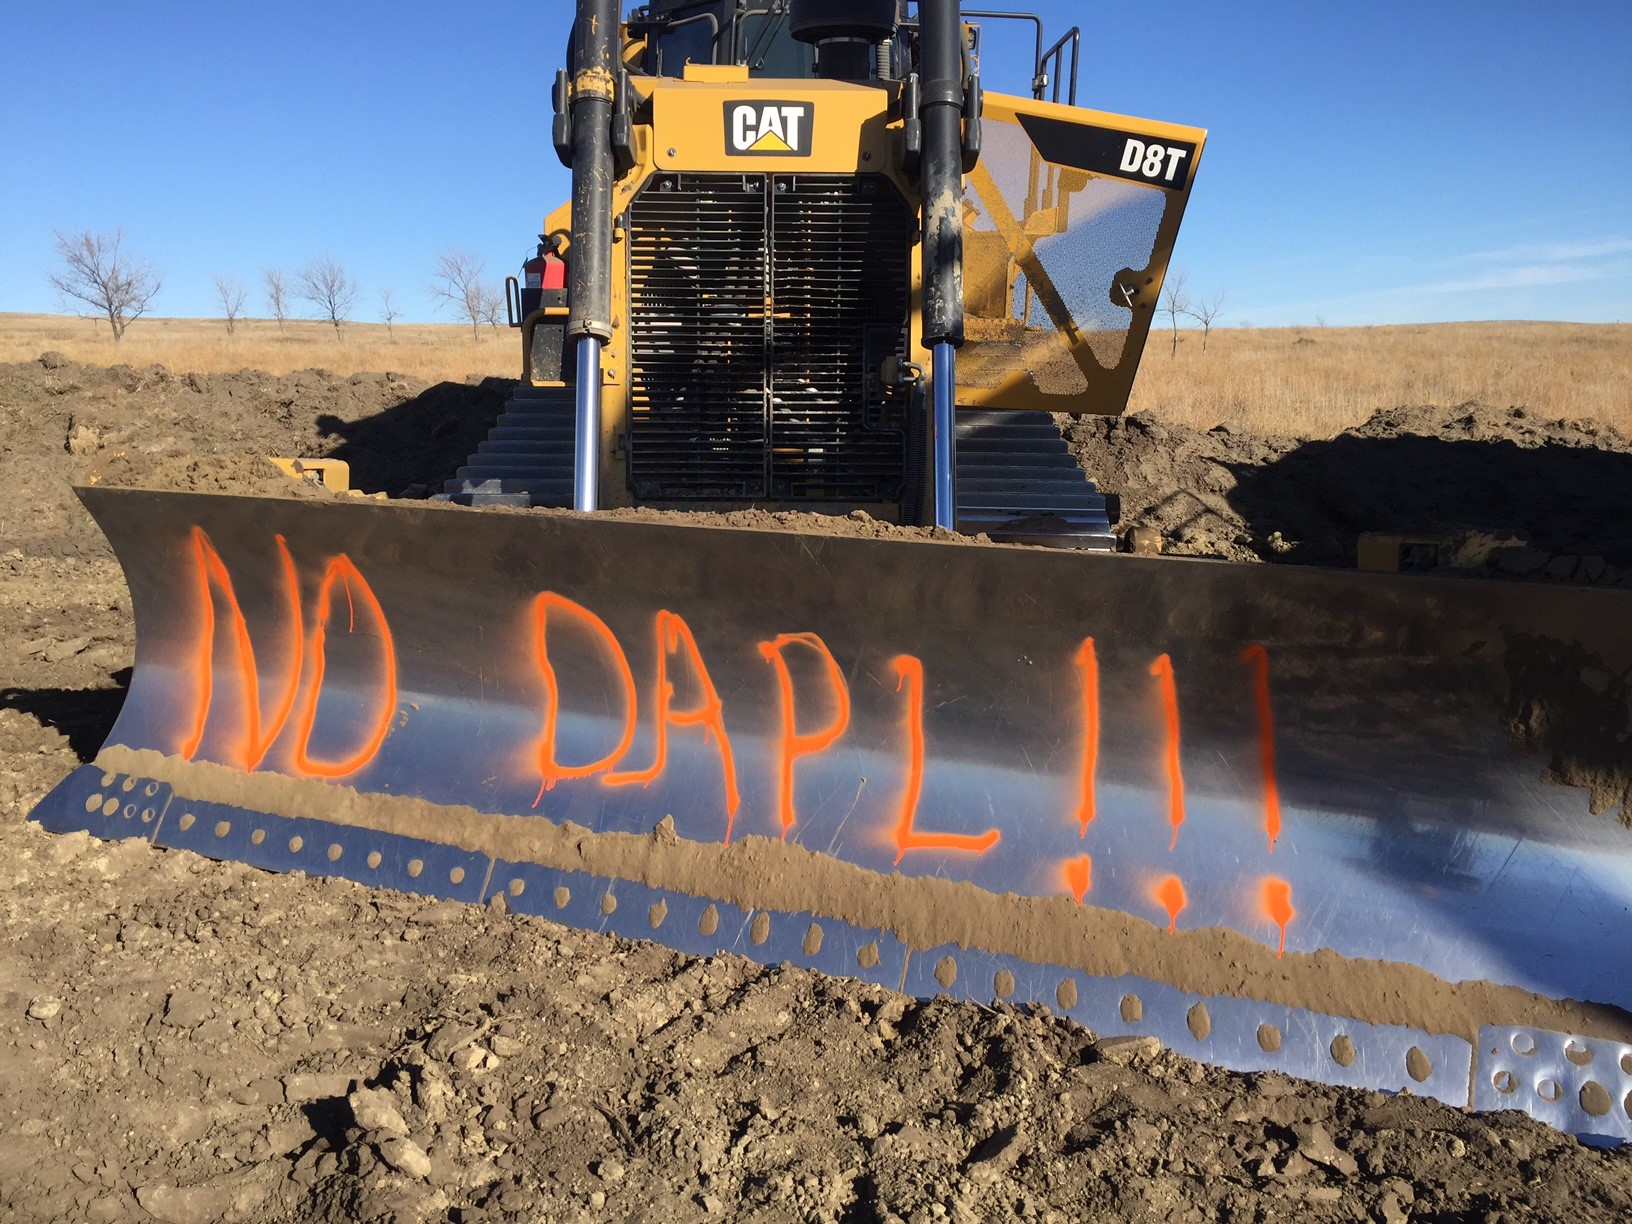 Army Corps still won't issue easement for Dakota Access Pipeline